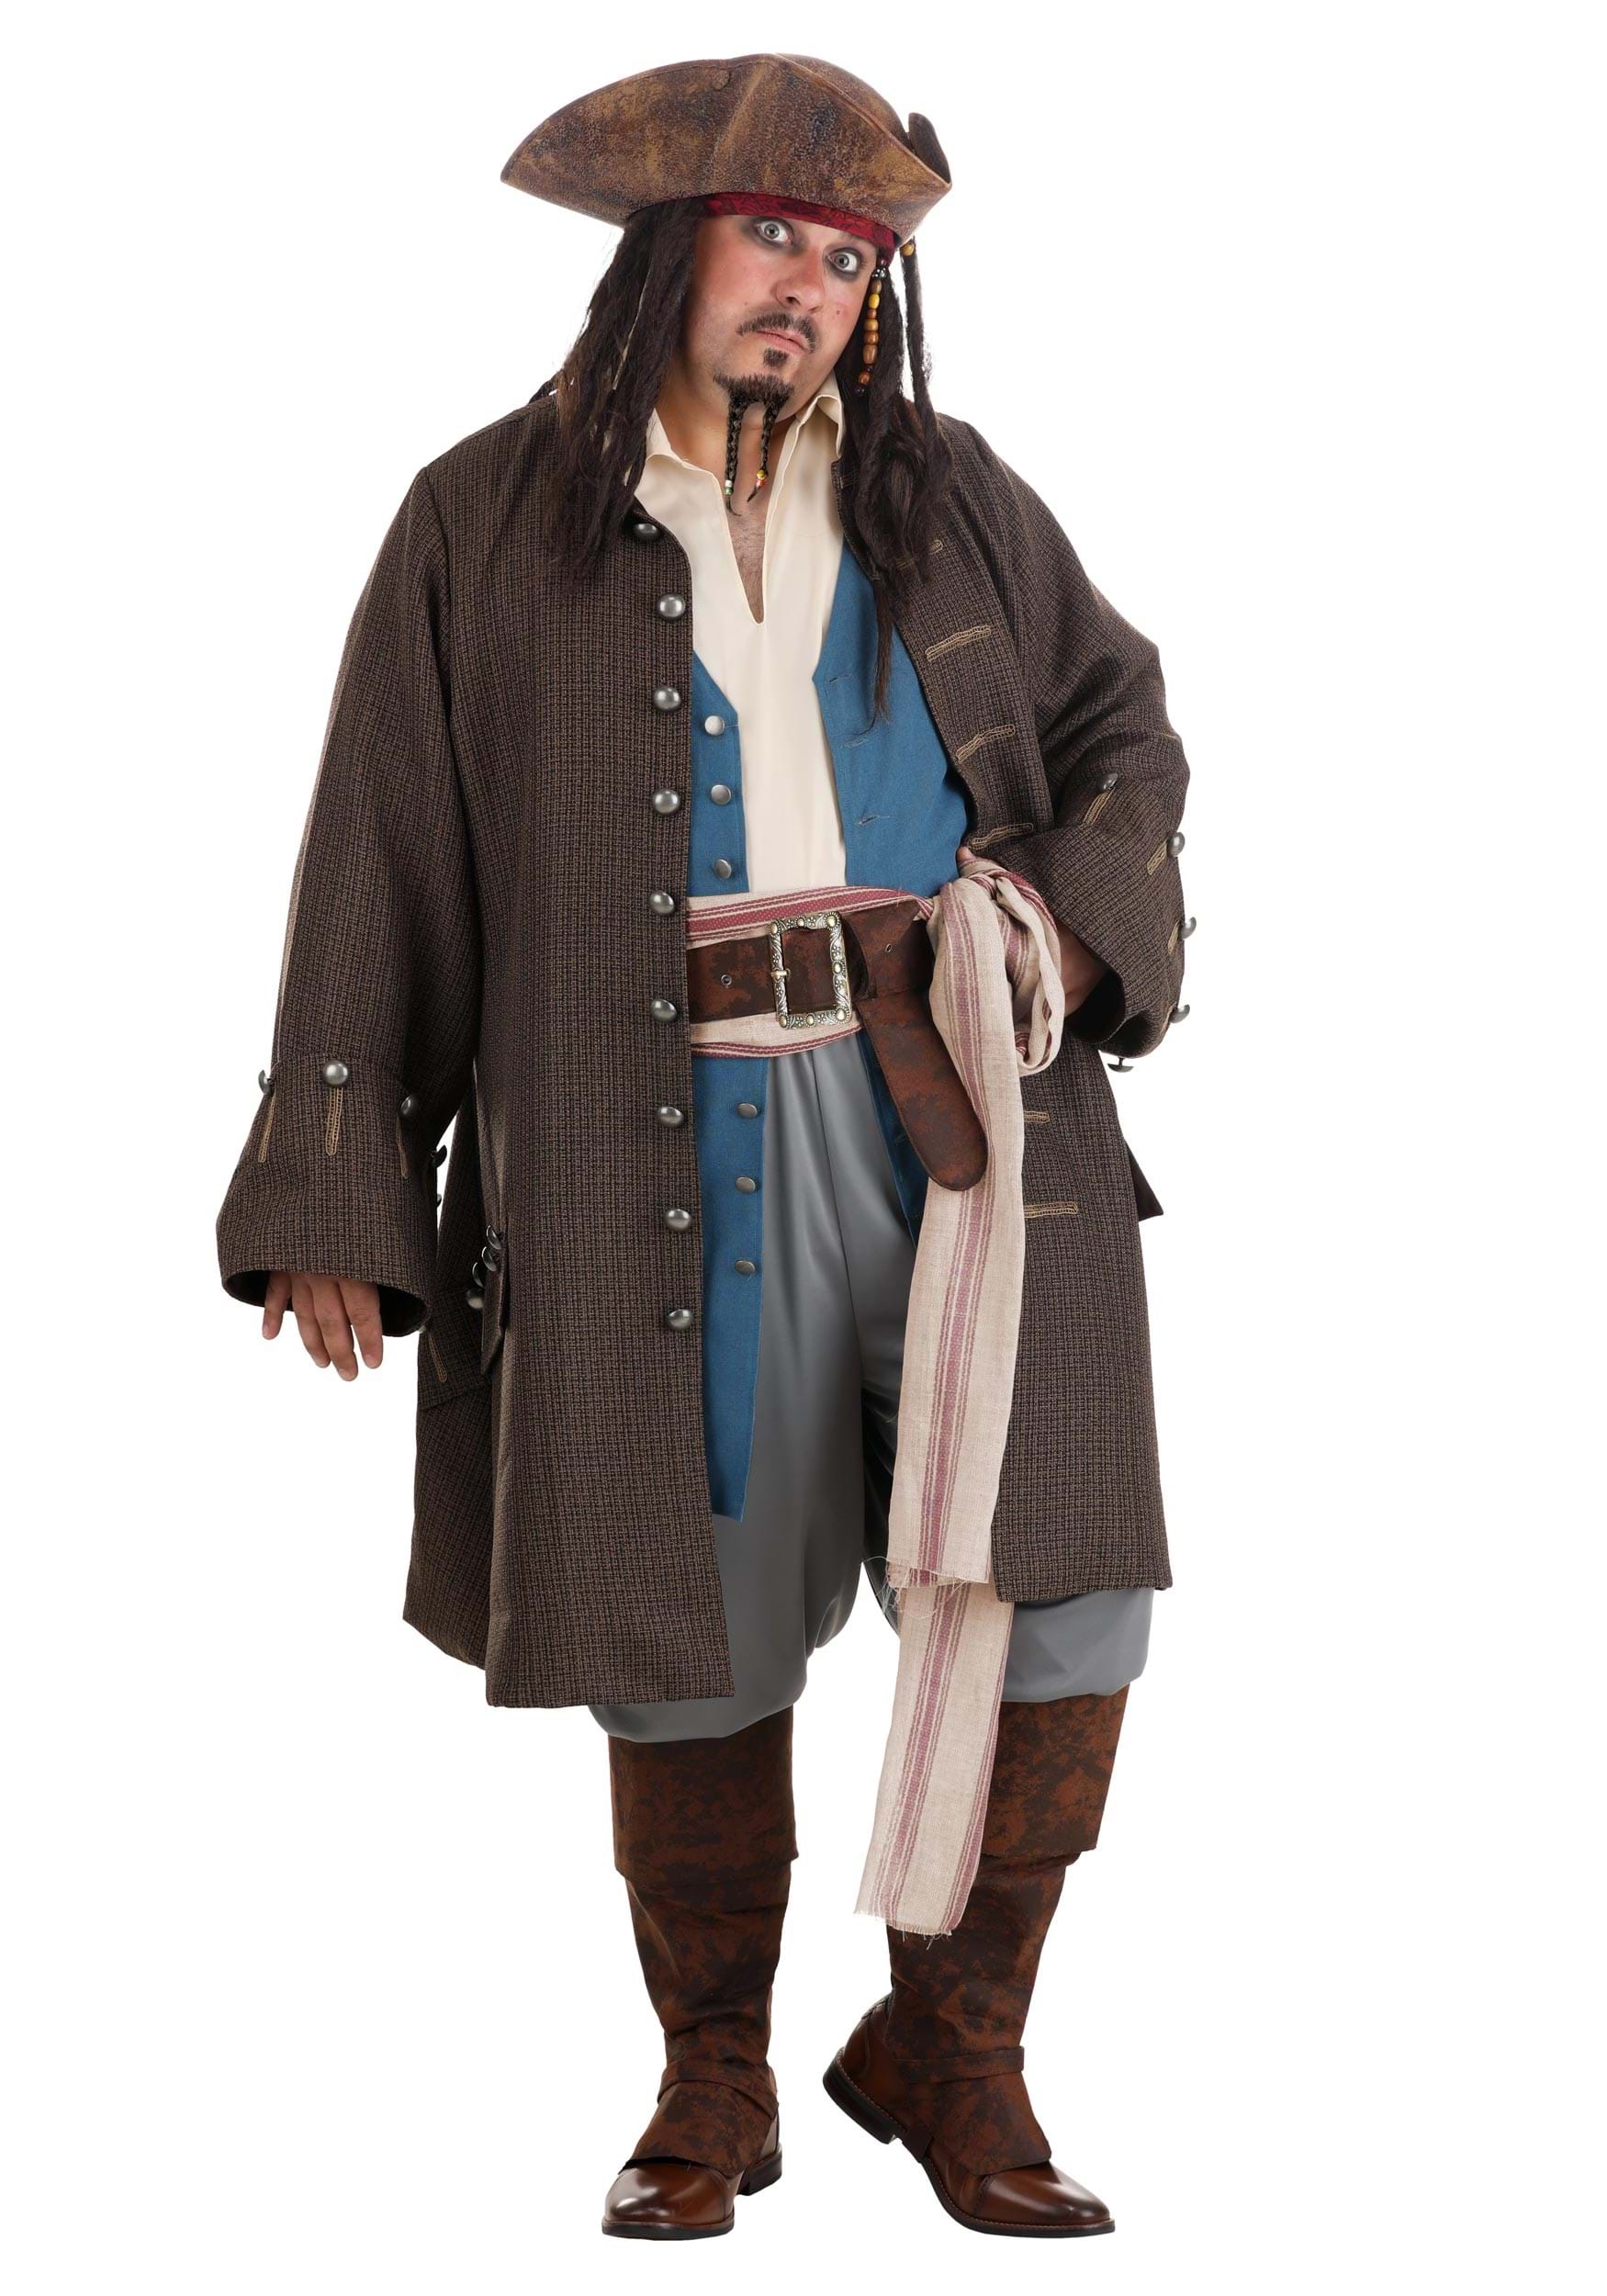 Photos - Fancy Dress Deluxe FUN Costumes  Jack Sparrow Pirate Plus Size Costume for Men Brown 